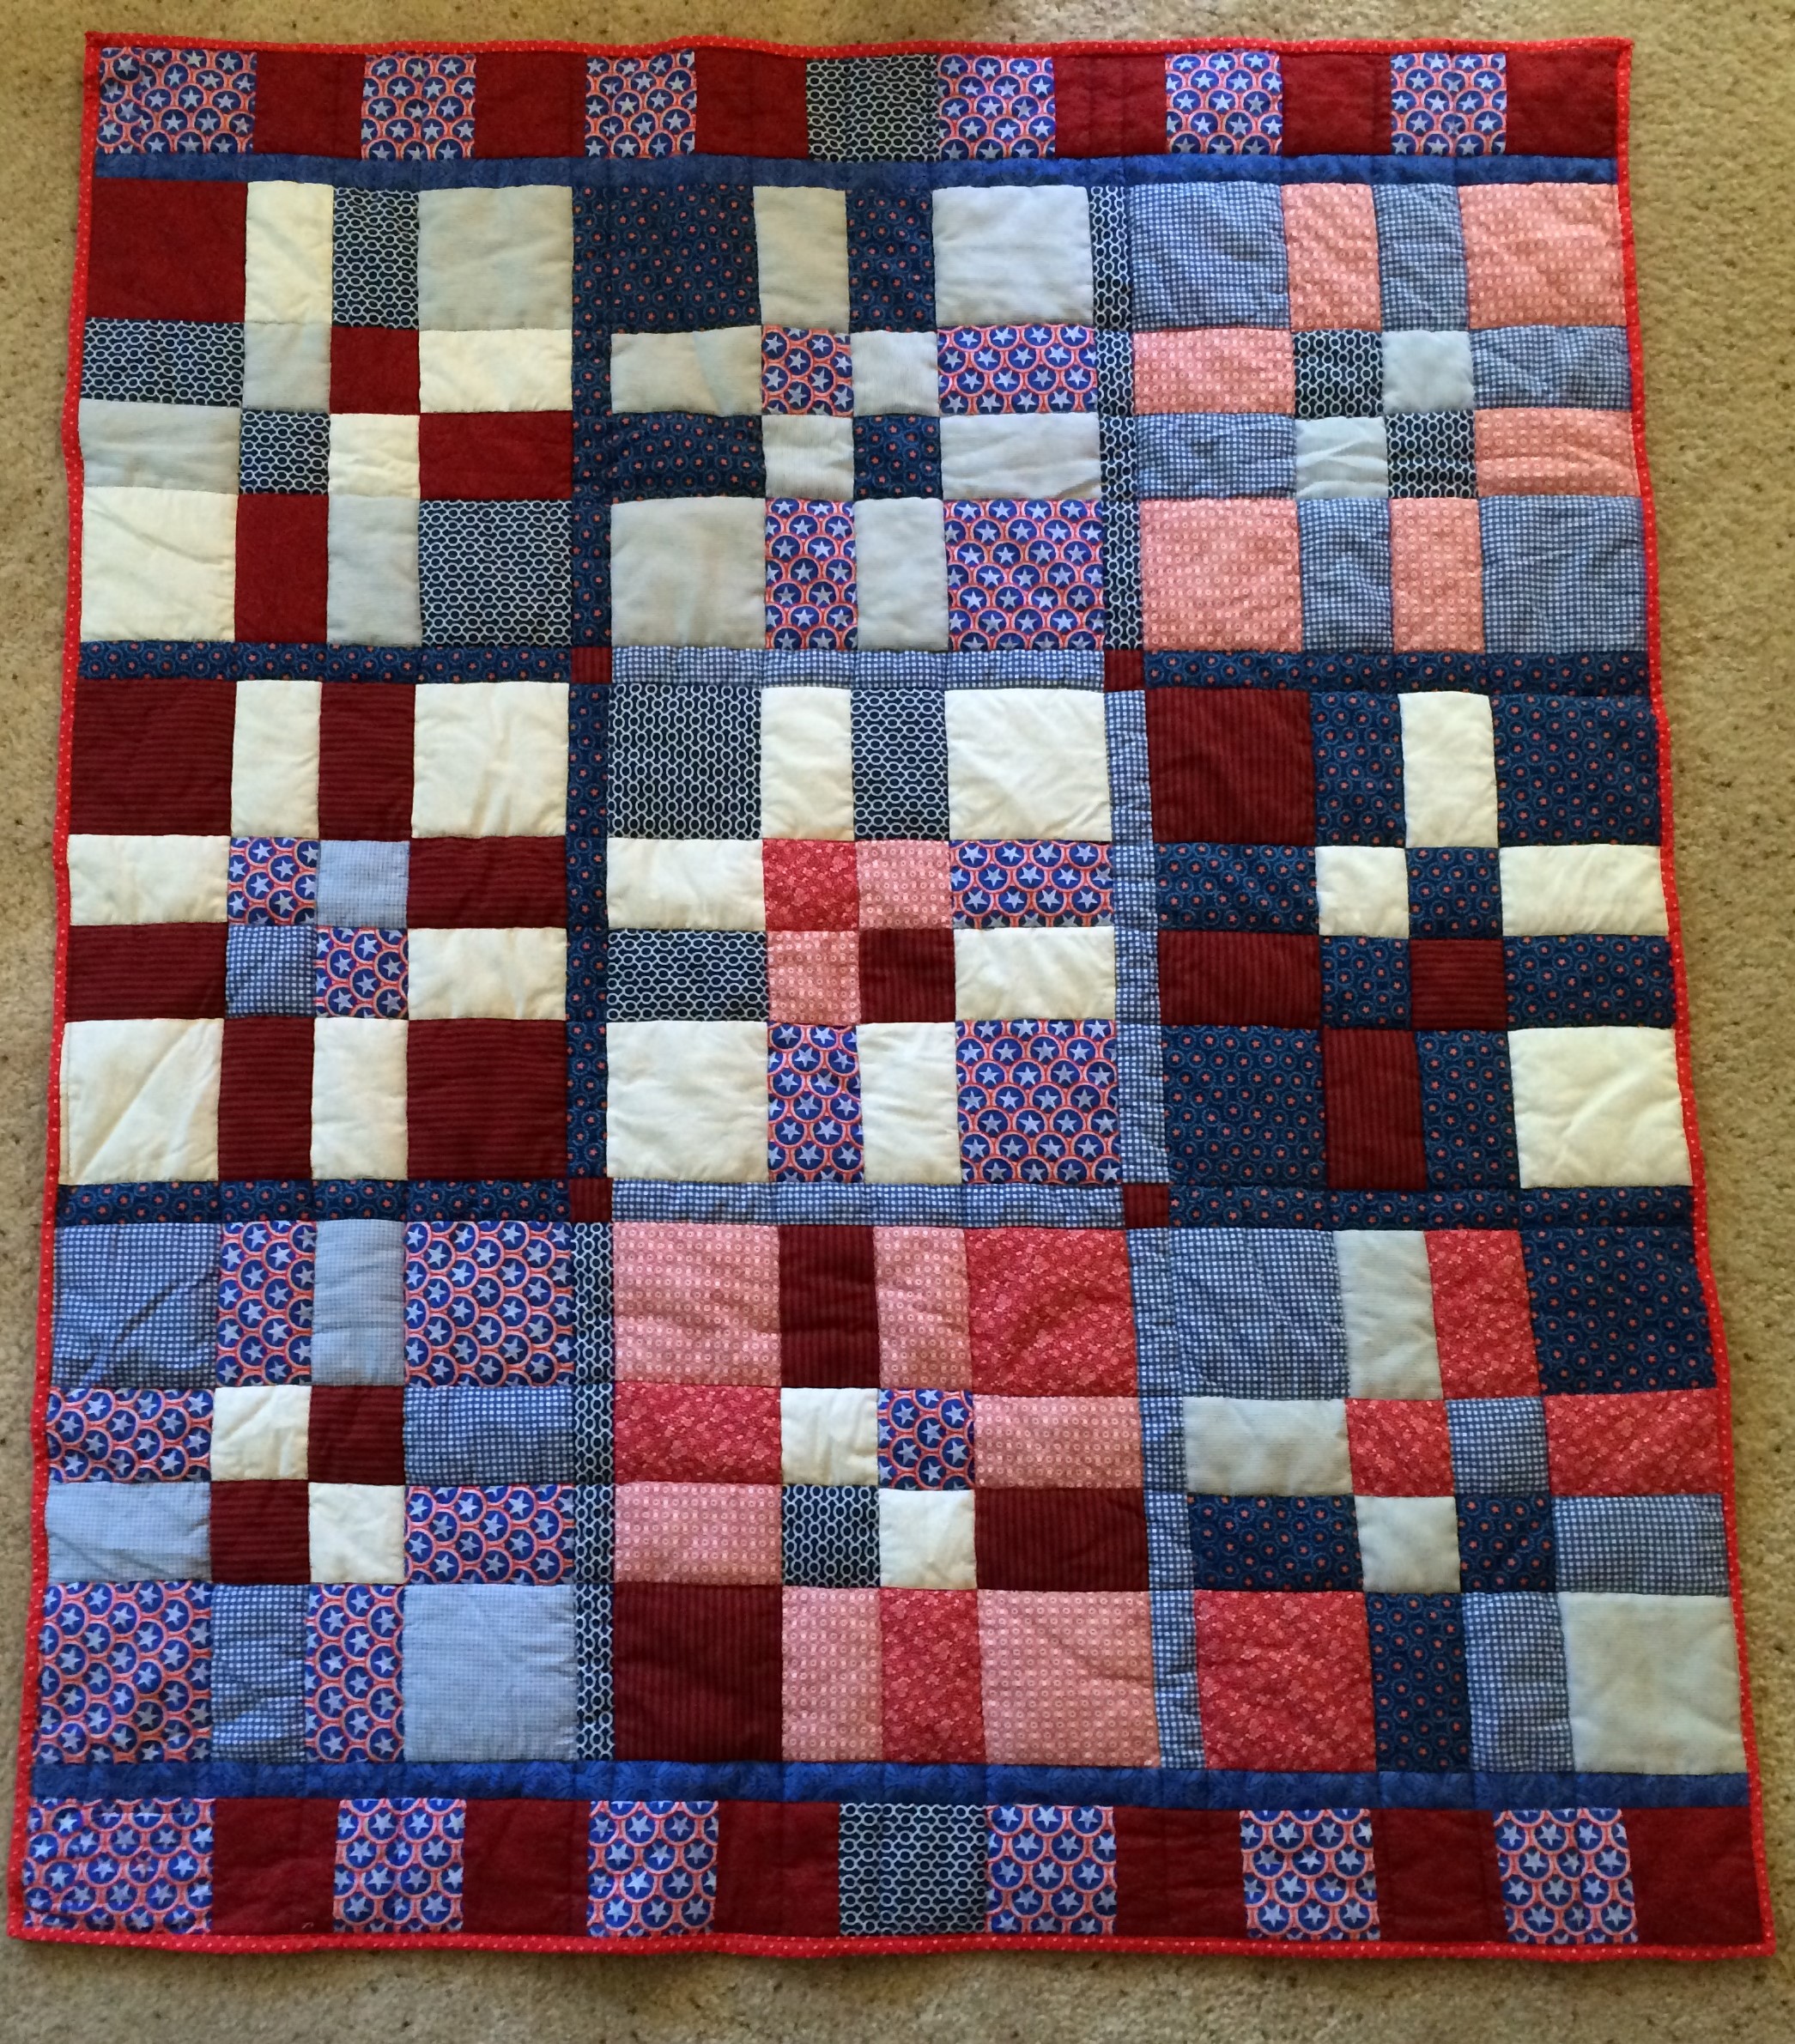 Artwork: Quilts » small quilts » patriotic disappearing 9 patch